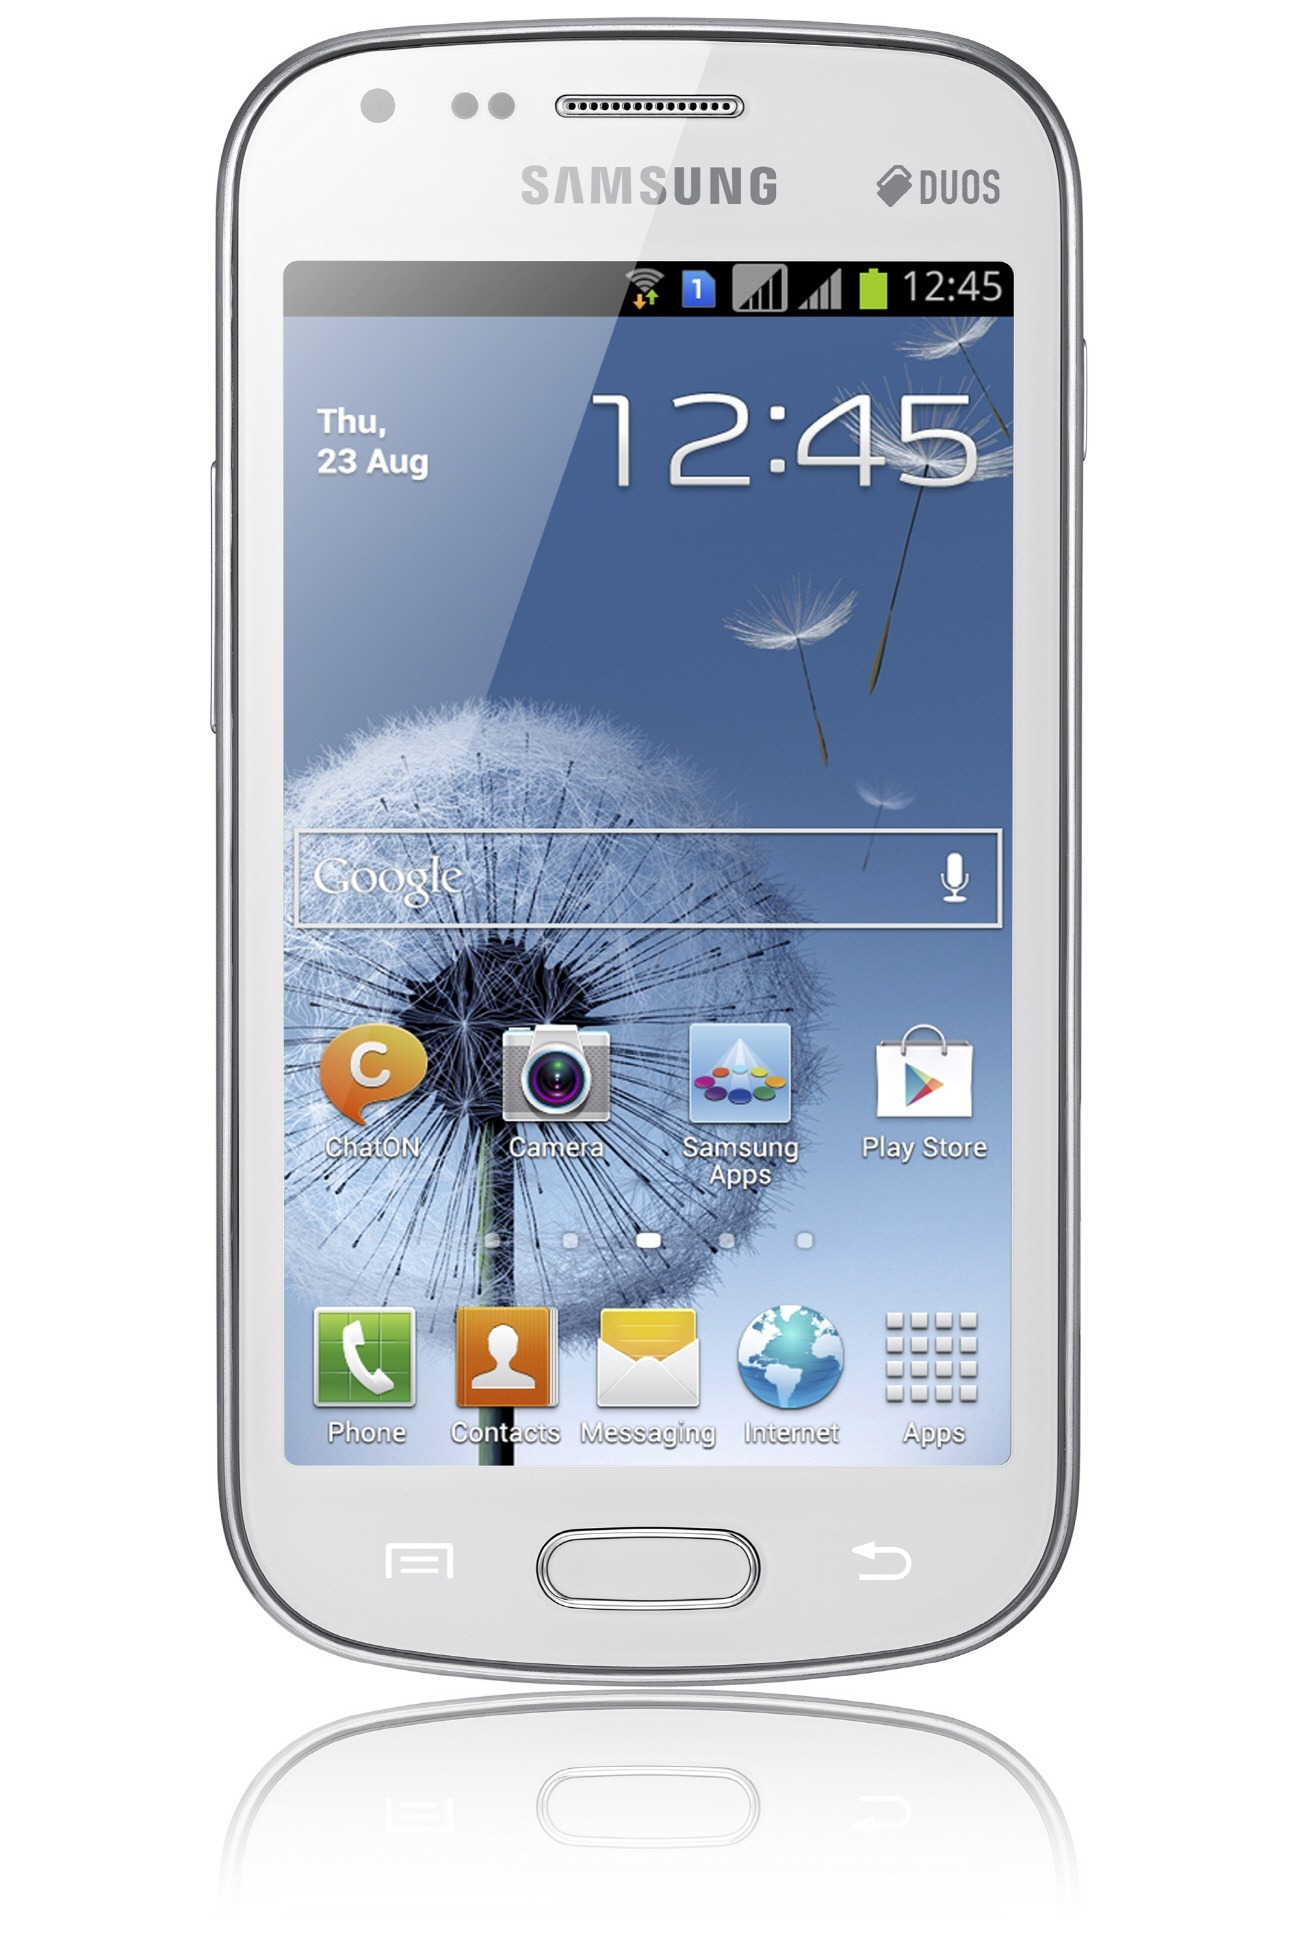 Samsung GALAXY S Duos Full Specifications And Price